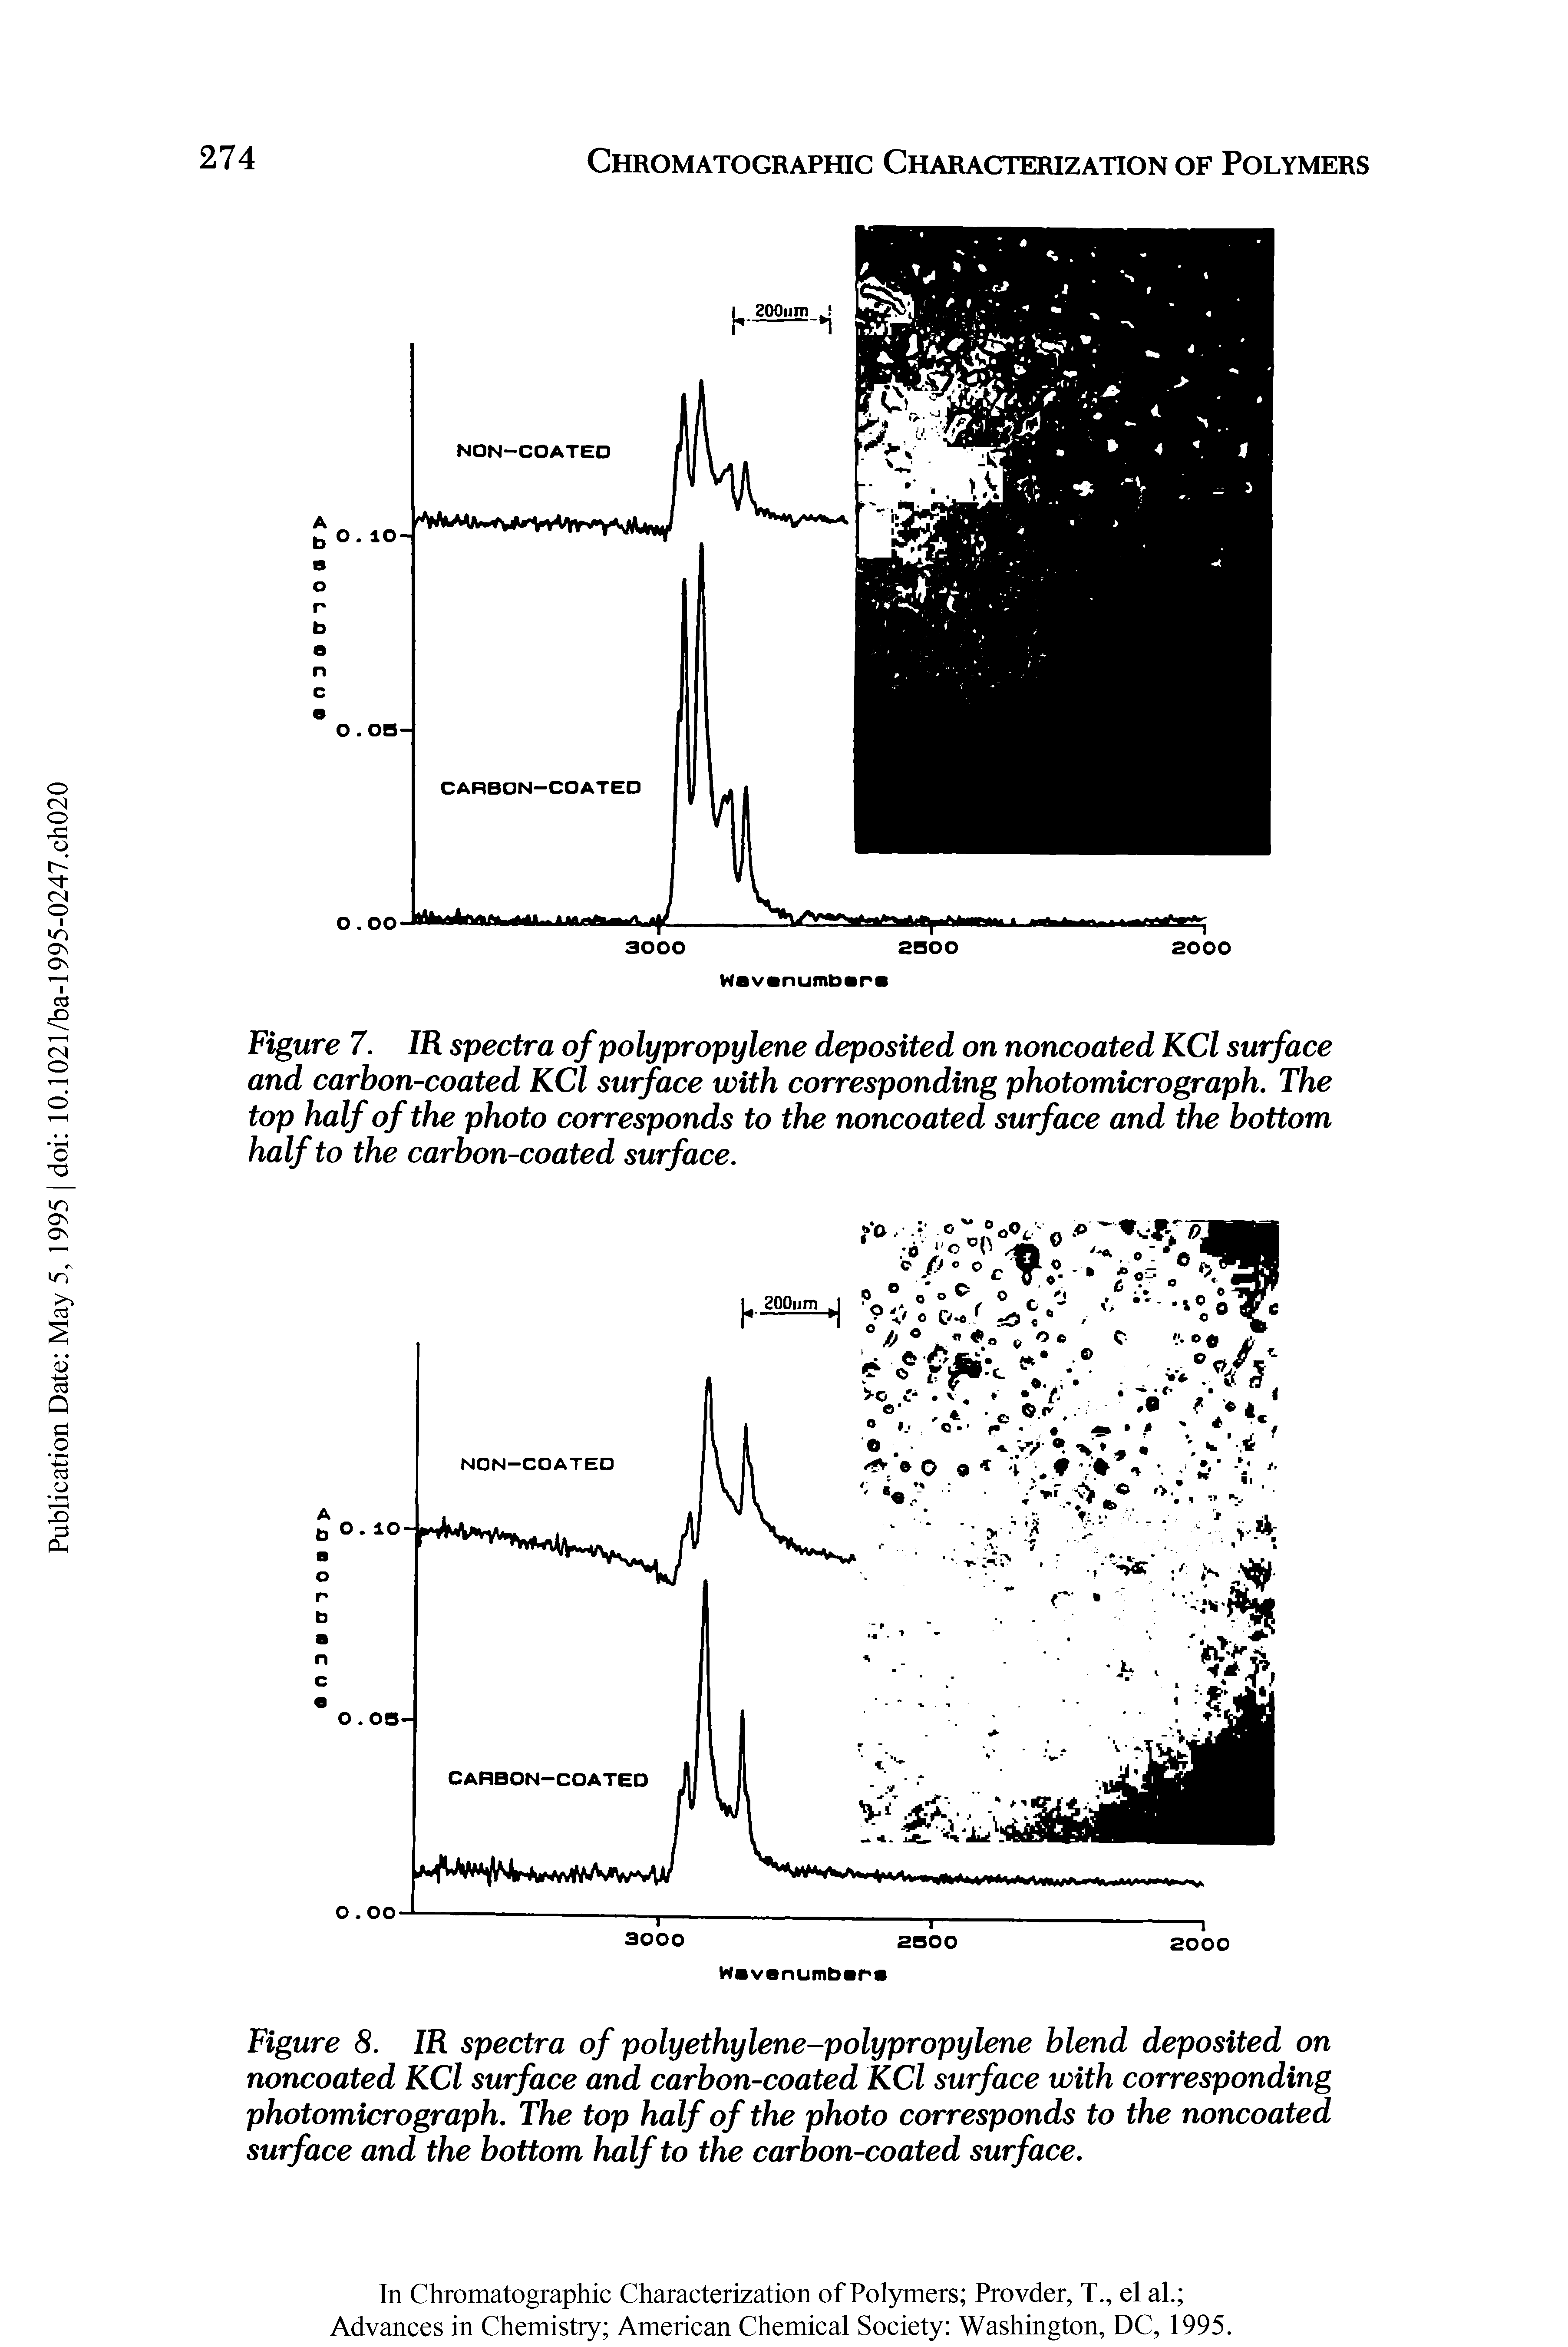 Figure 8. IR spectra of polyethylene-polypropylene blend deposited on noncoated KCl surface and carbon-coated KCl surface with corresponding photomicrograph. The top half of the photo corresponds to the noncoated surface and the bottom half to the carbon-coated surface.